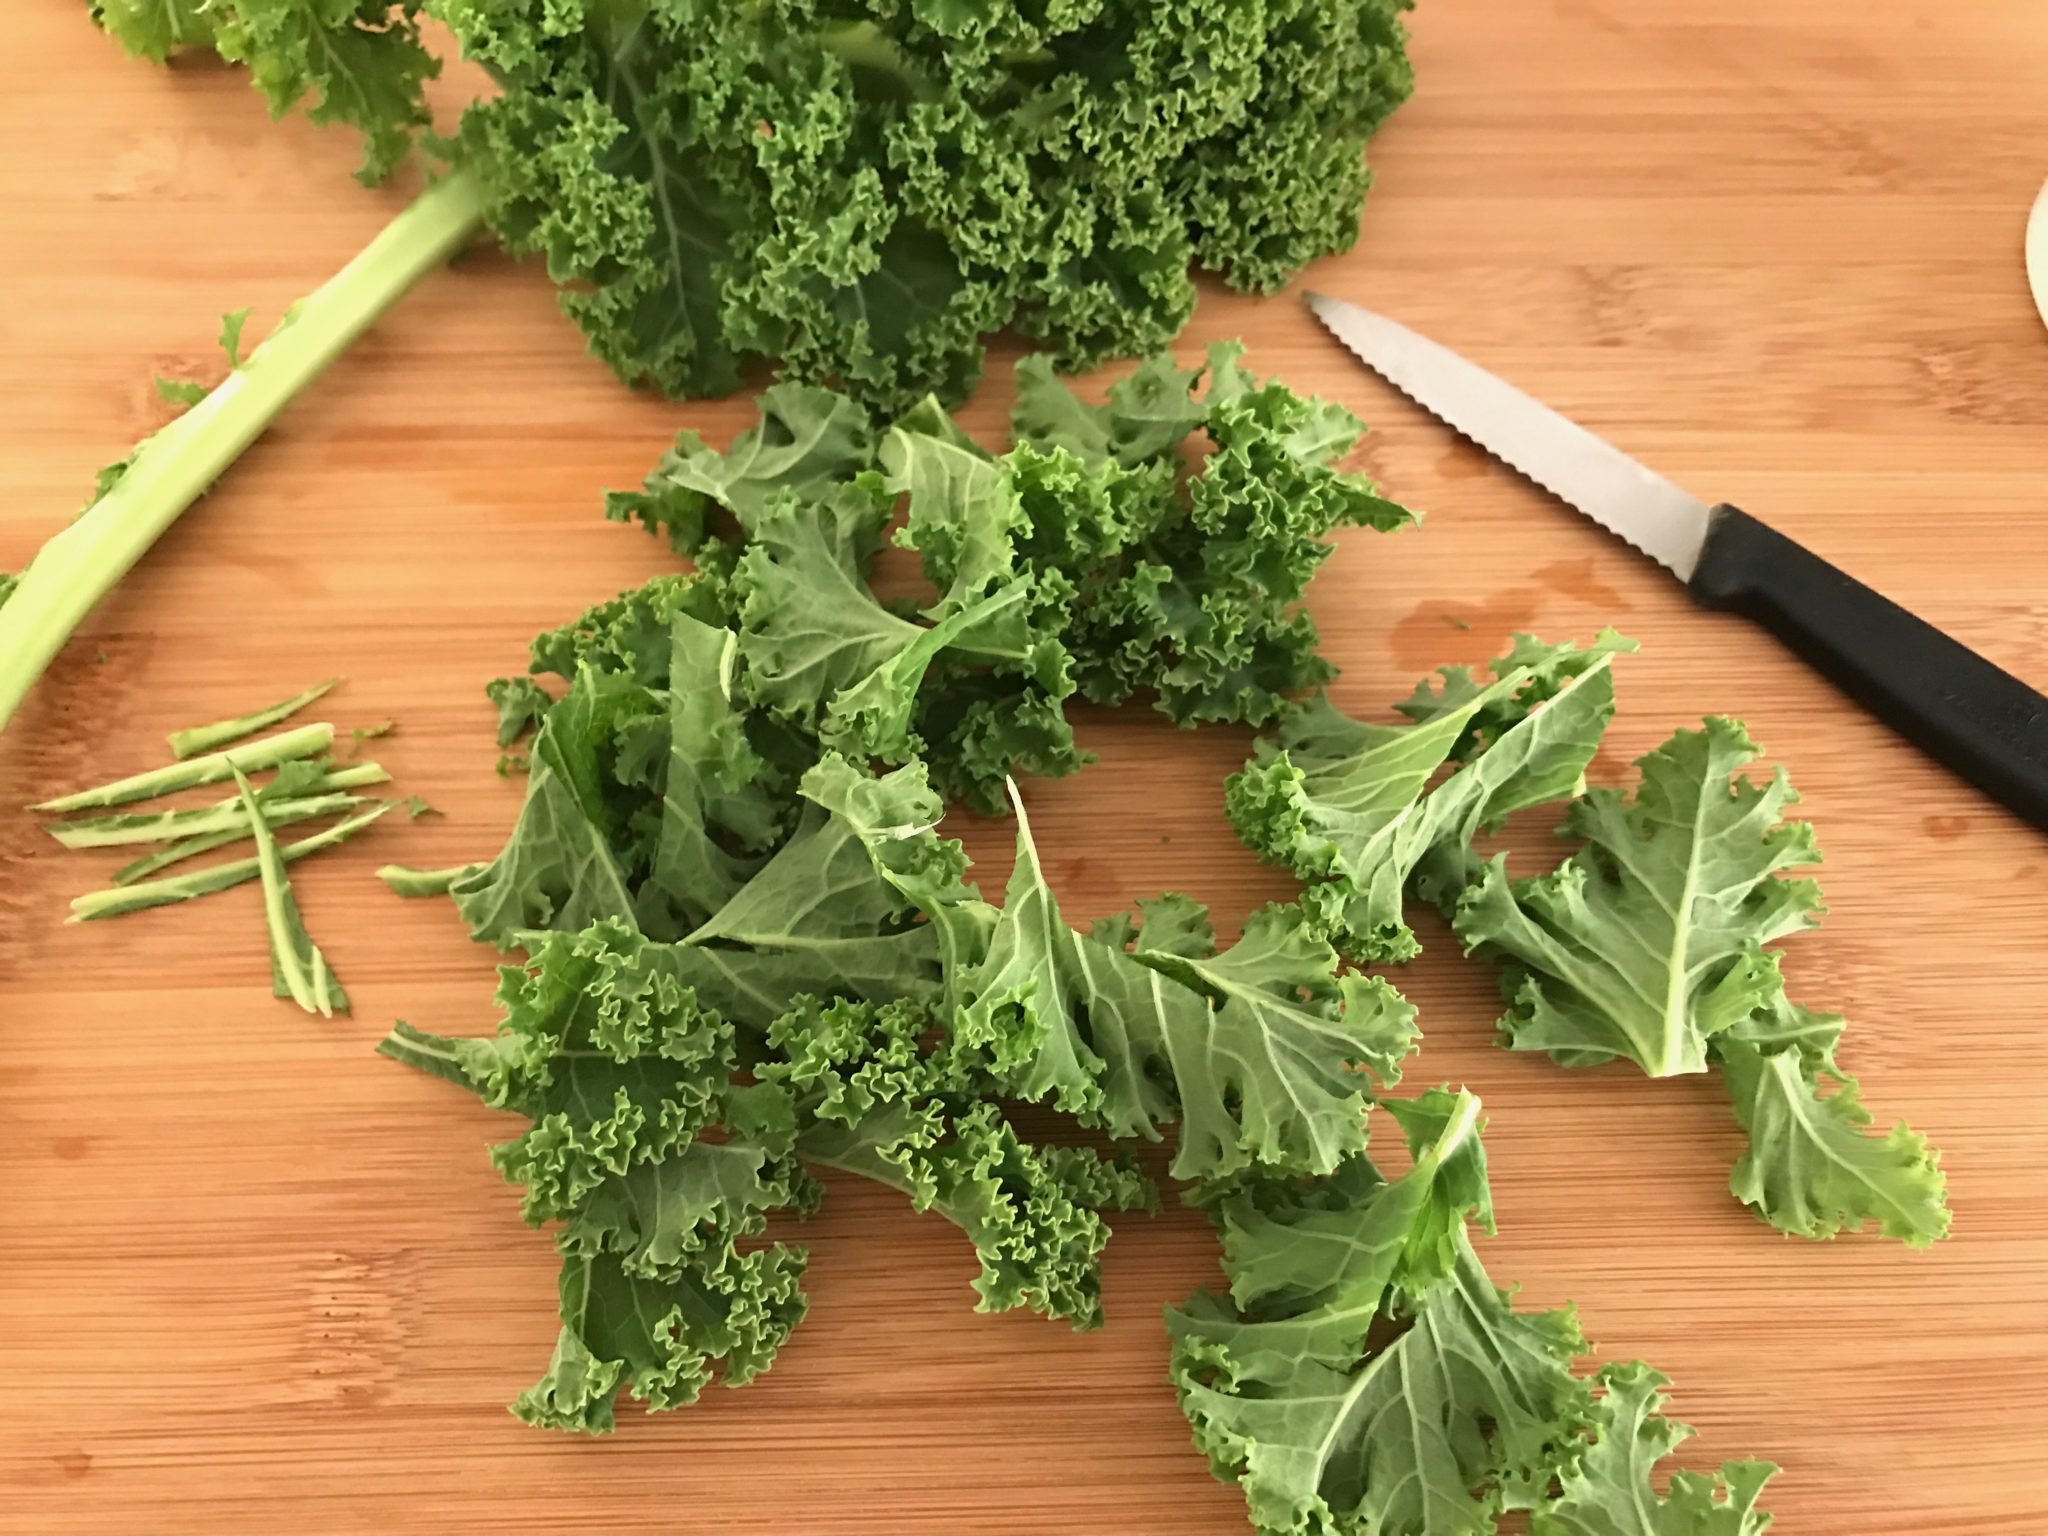 cut kale into bite-size pieces and remove the stems